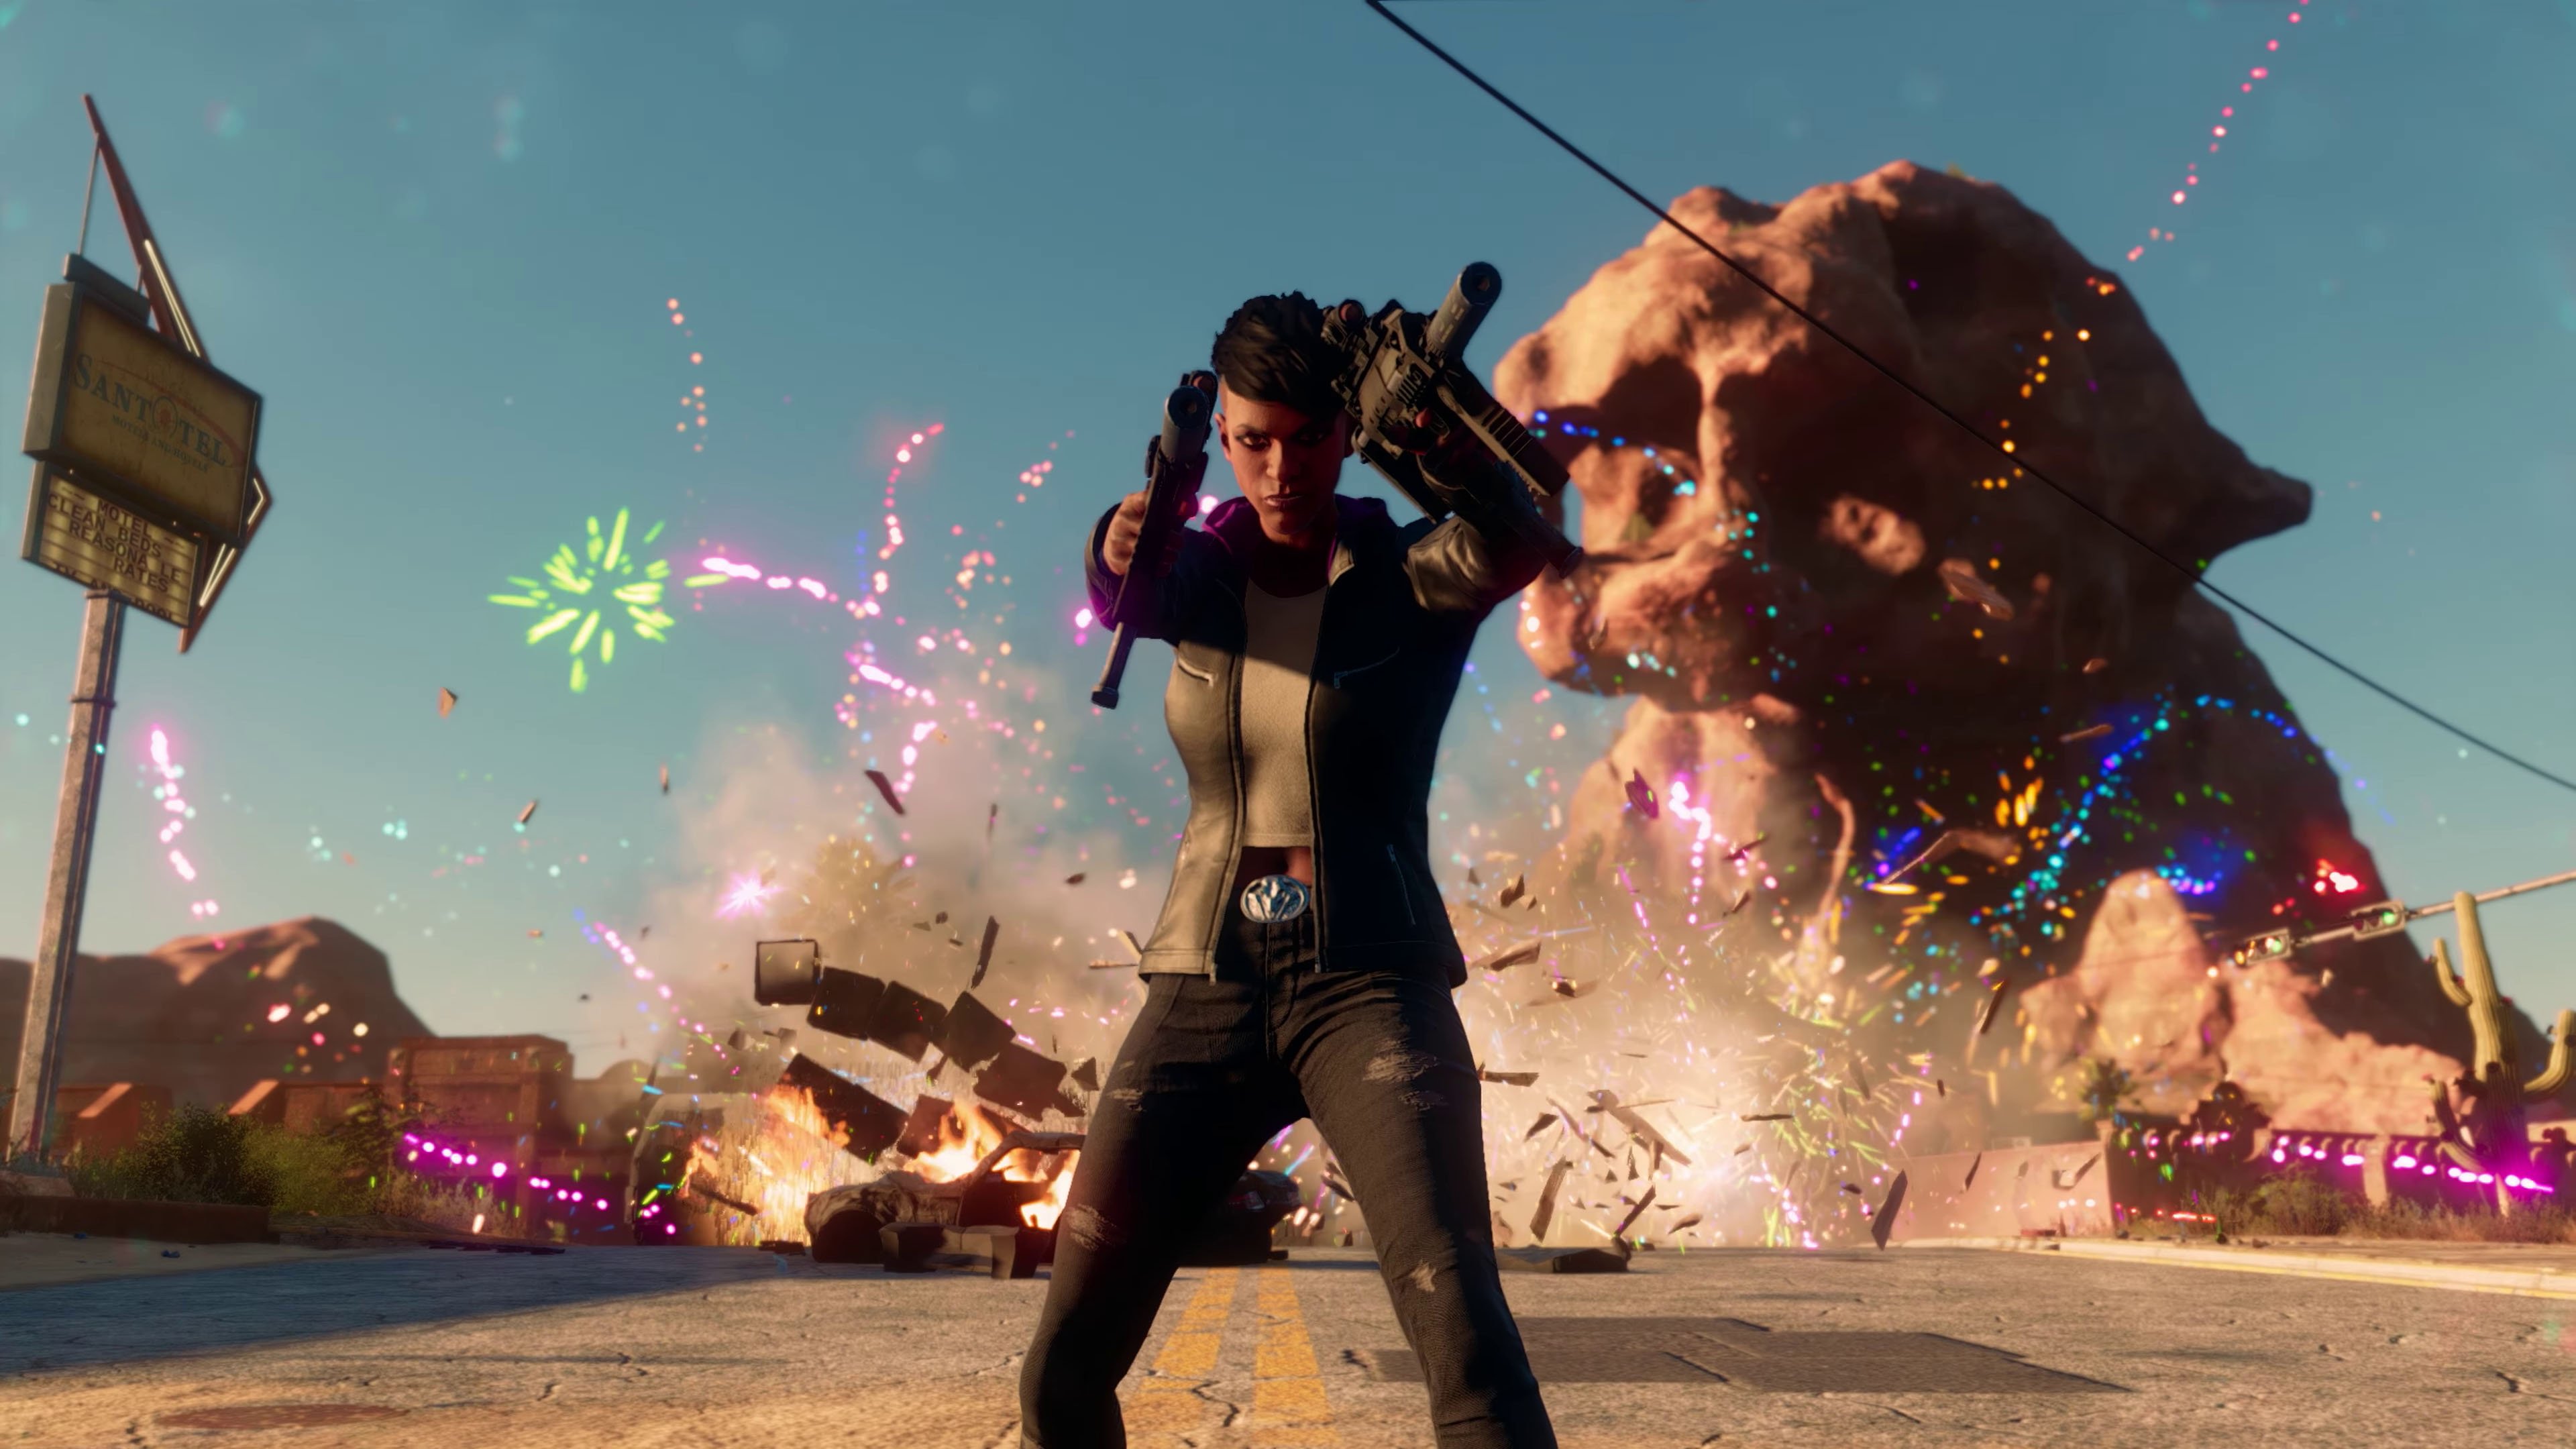 Saints Row Gameplay Reassures Hesitant Fans About the Reboot